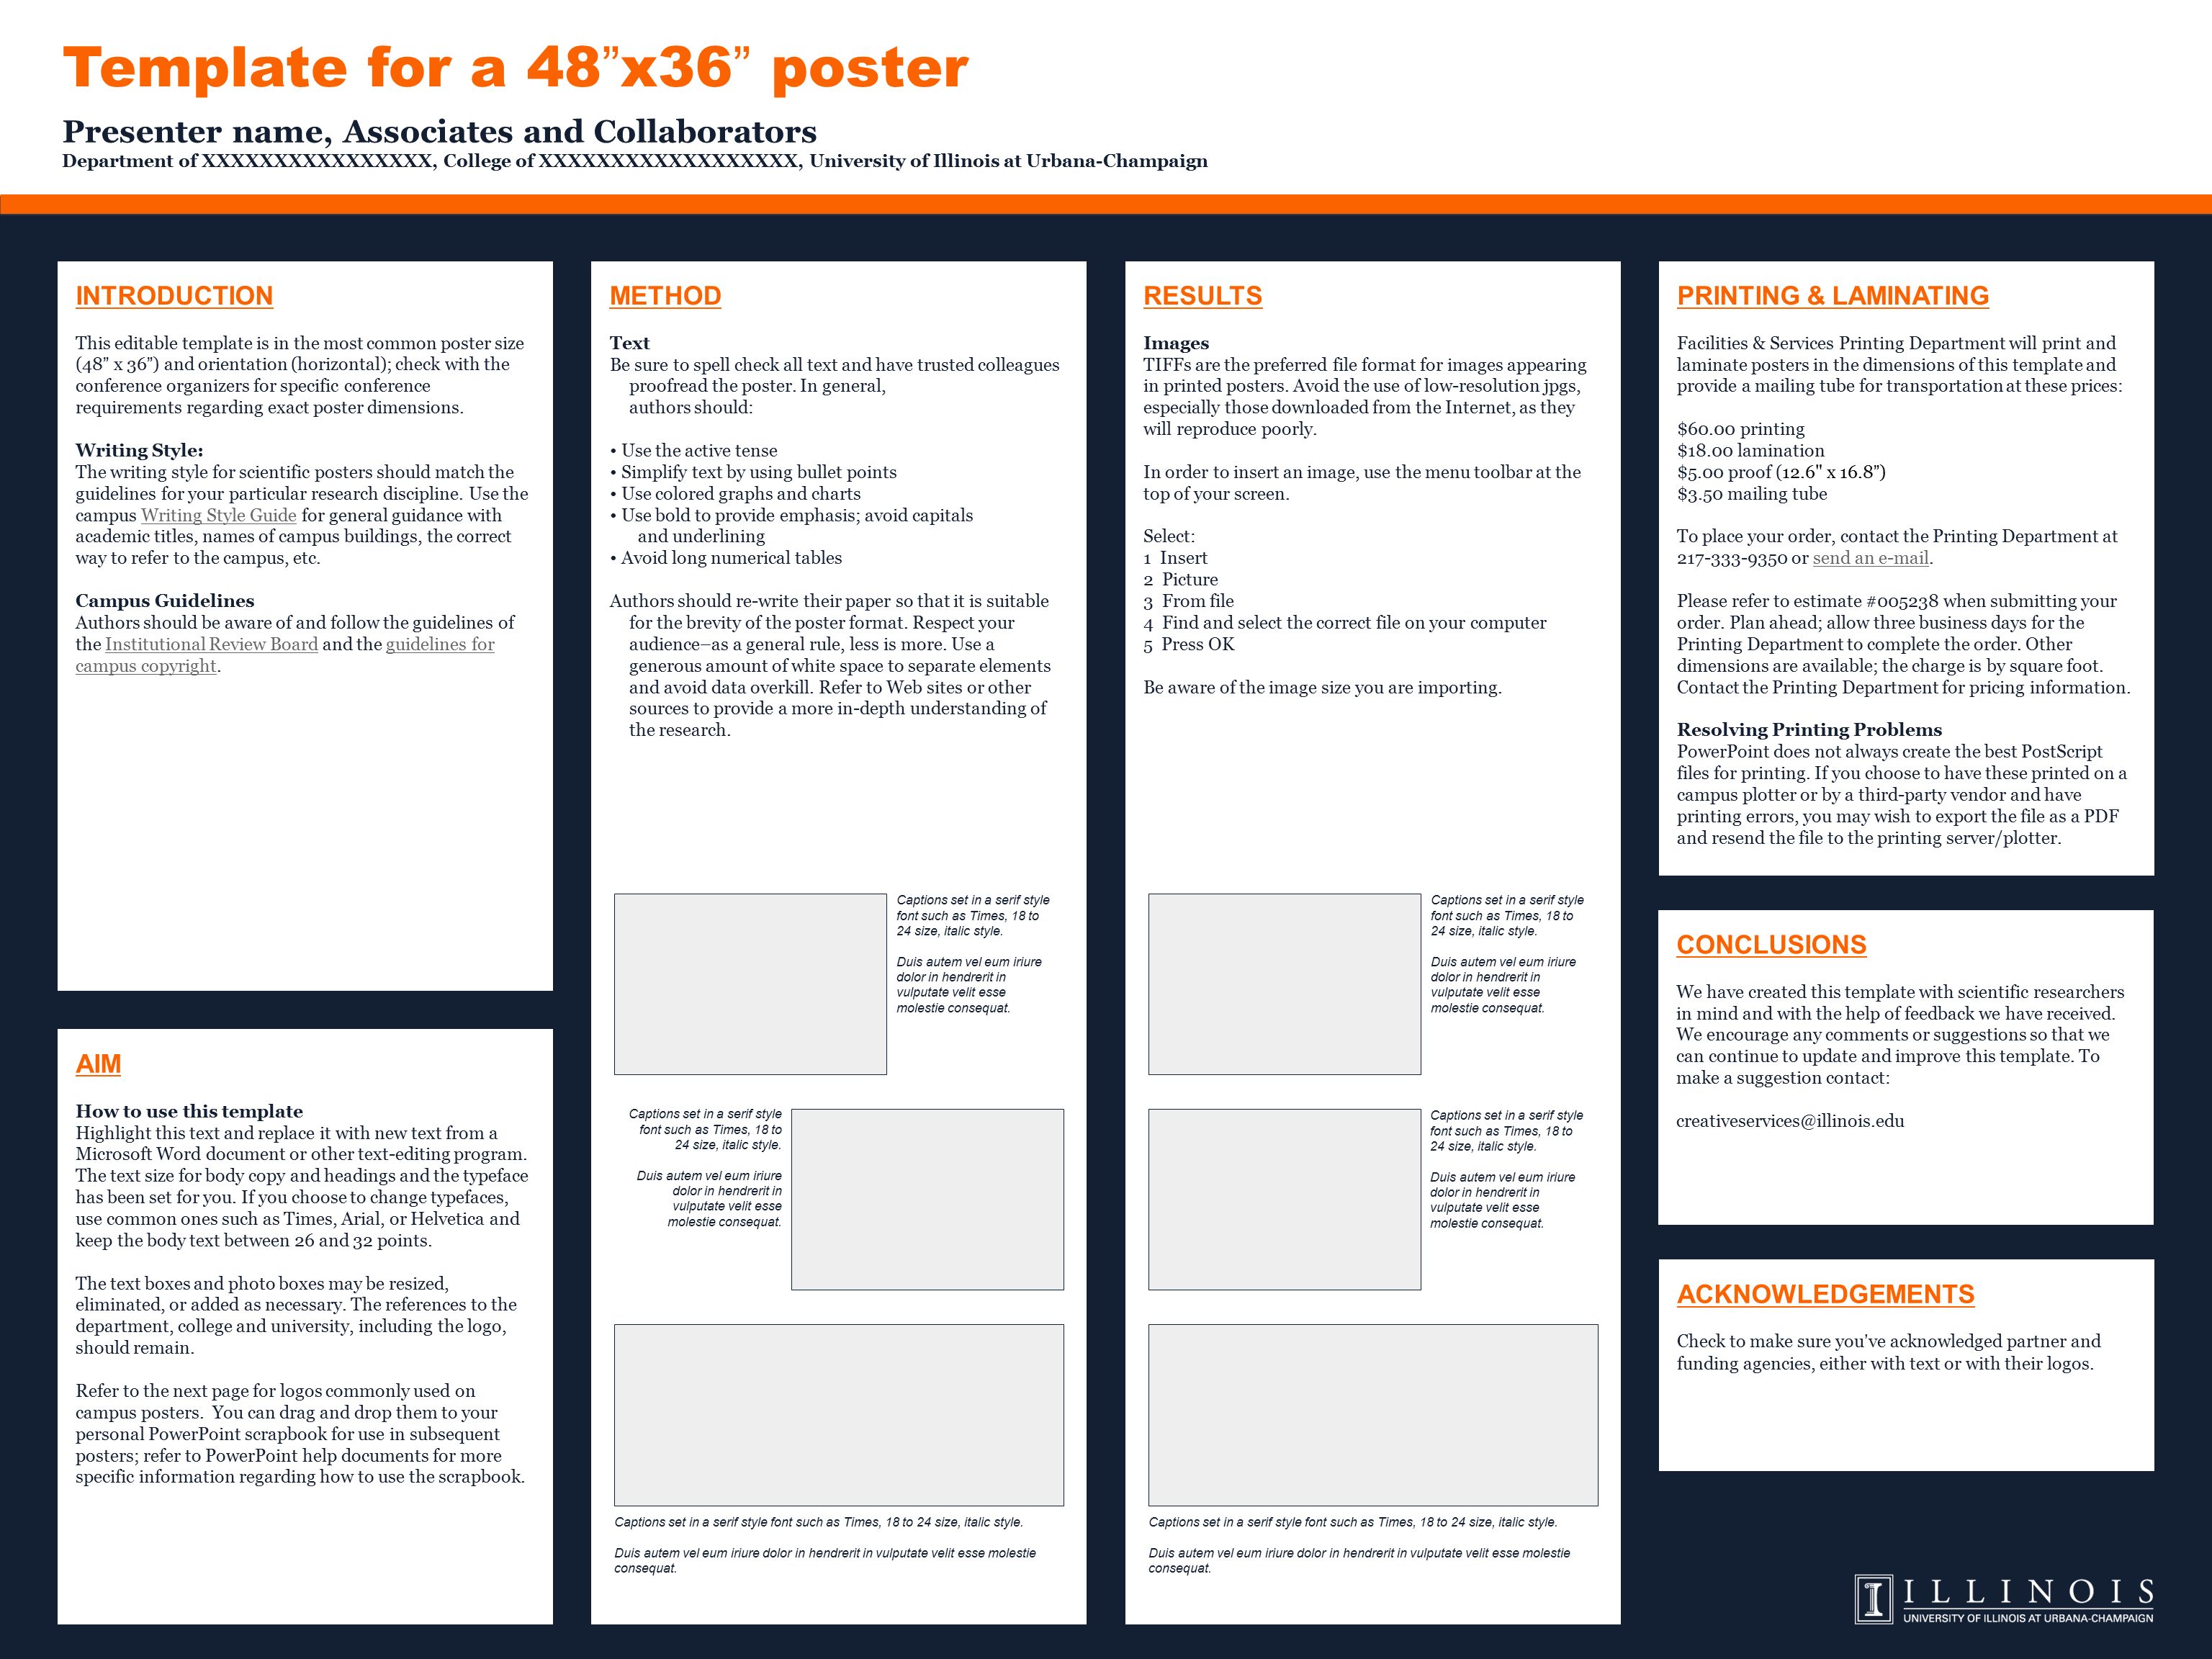 Presenter name, Associates and Collaborators Department of XXXXXXXXXXXXXXXX, College of XXXXXXXXXXXXXXXXXX, University of Illinois at Urbana-Champaign Template for a 48 x36 poster ACKNOWLEDGEMENTS Check to make sure you’ve acknowledged partner and funding agencies, either with text or with their logos.